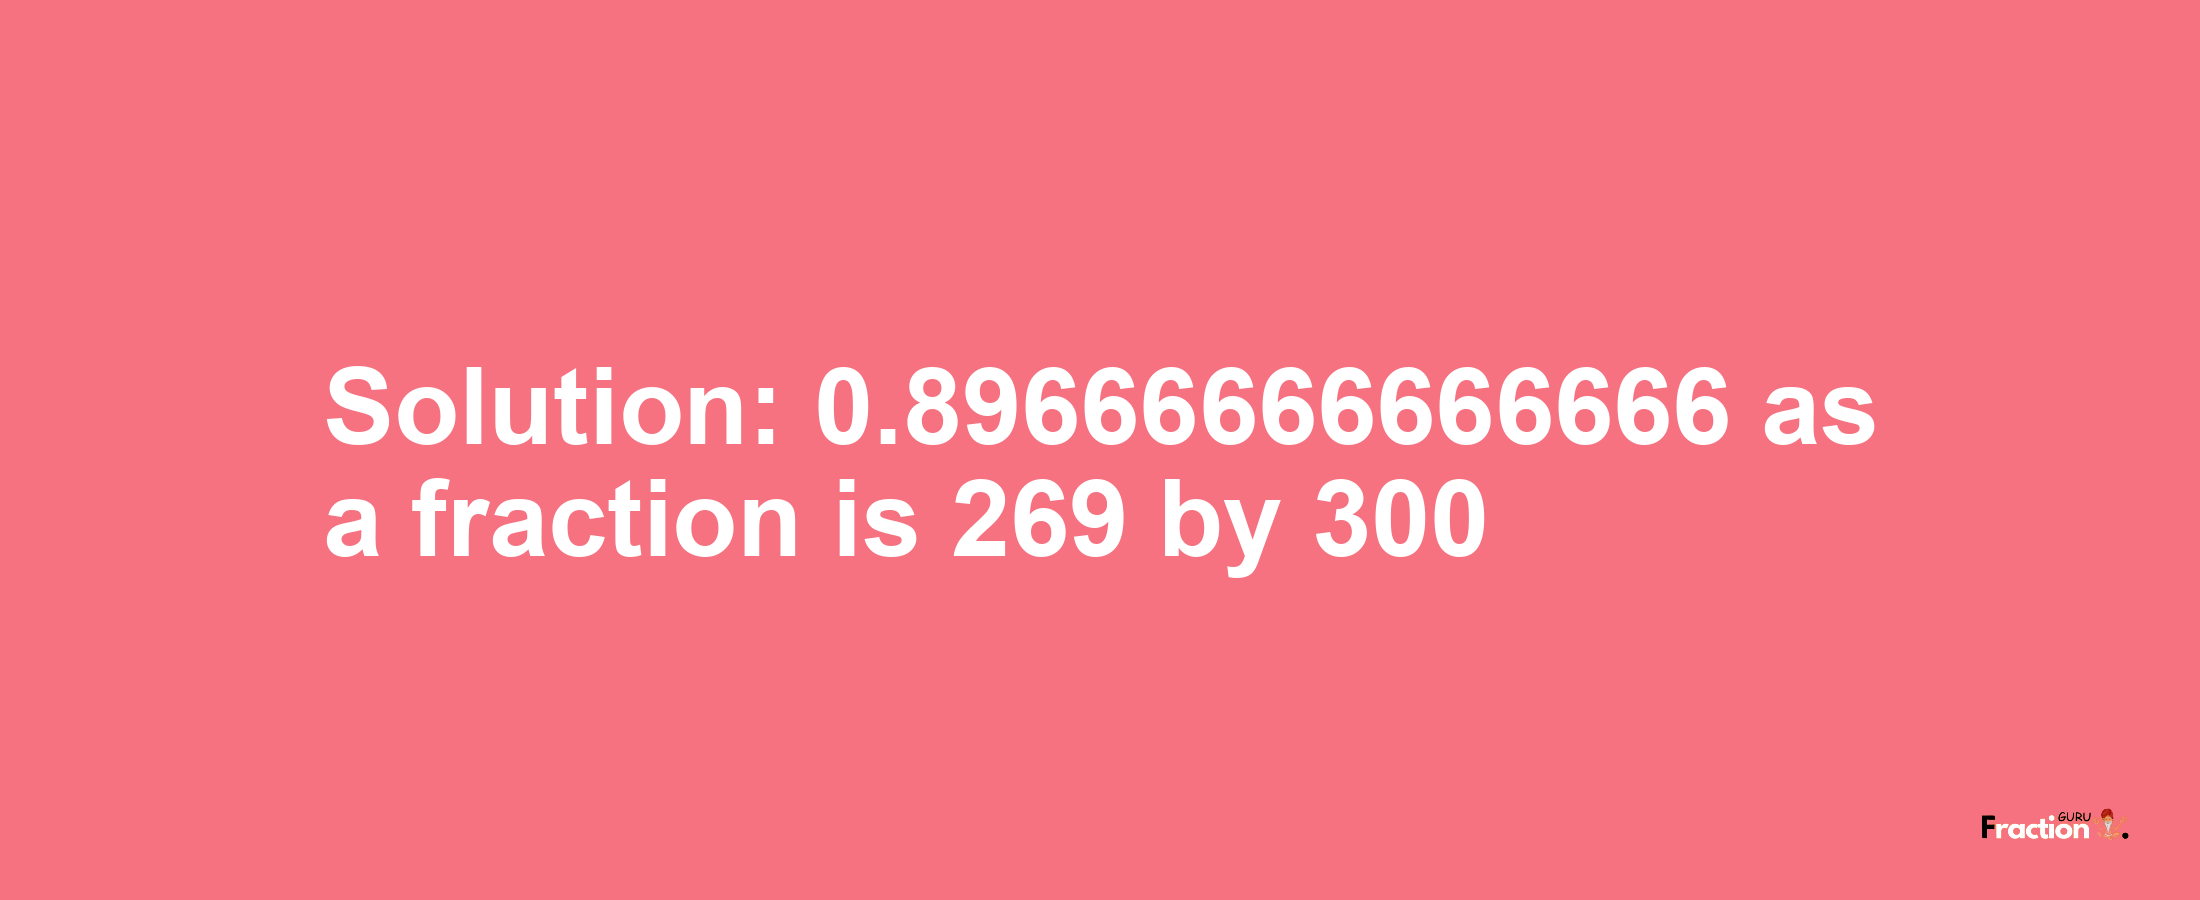 Solution:0.89666666666666 as a fraction is 269/300